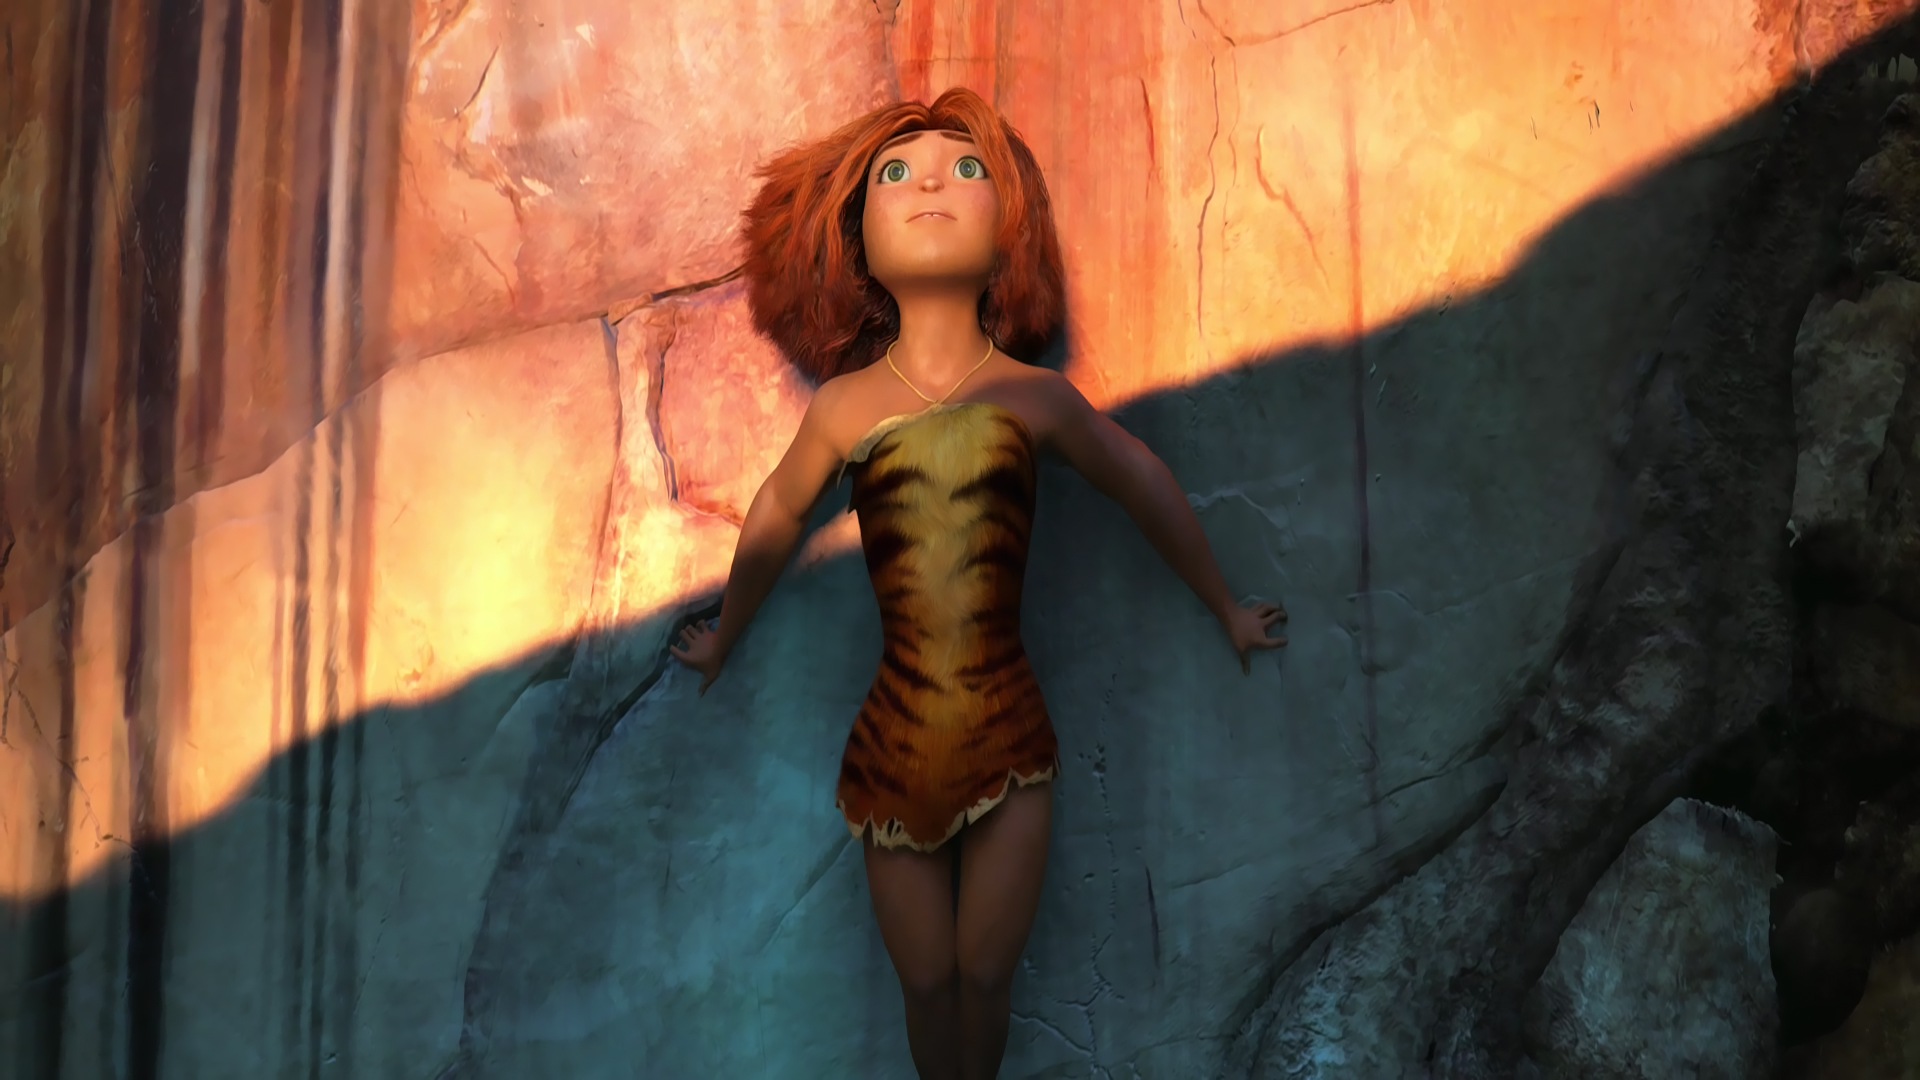 V Croods HD Movie Wallpapers #2 - 1920x1080